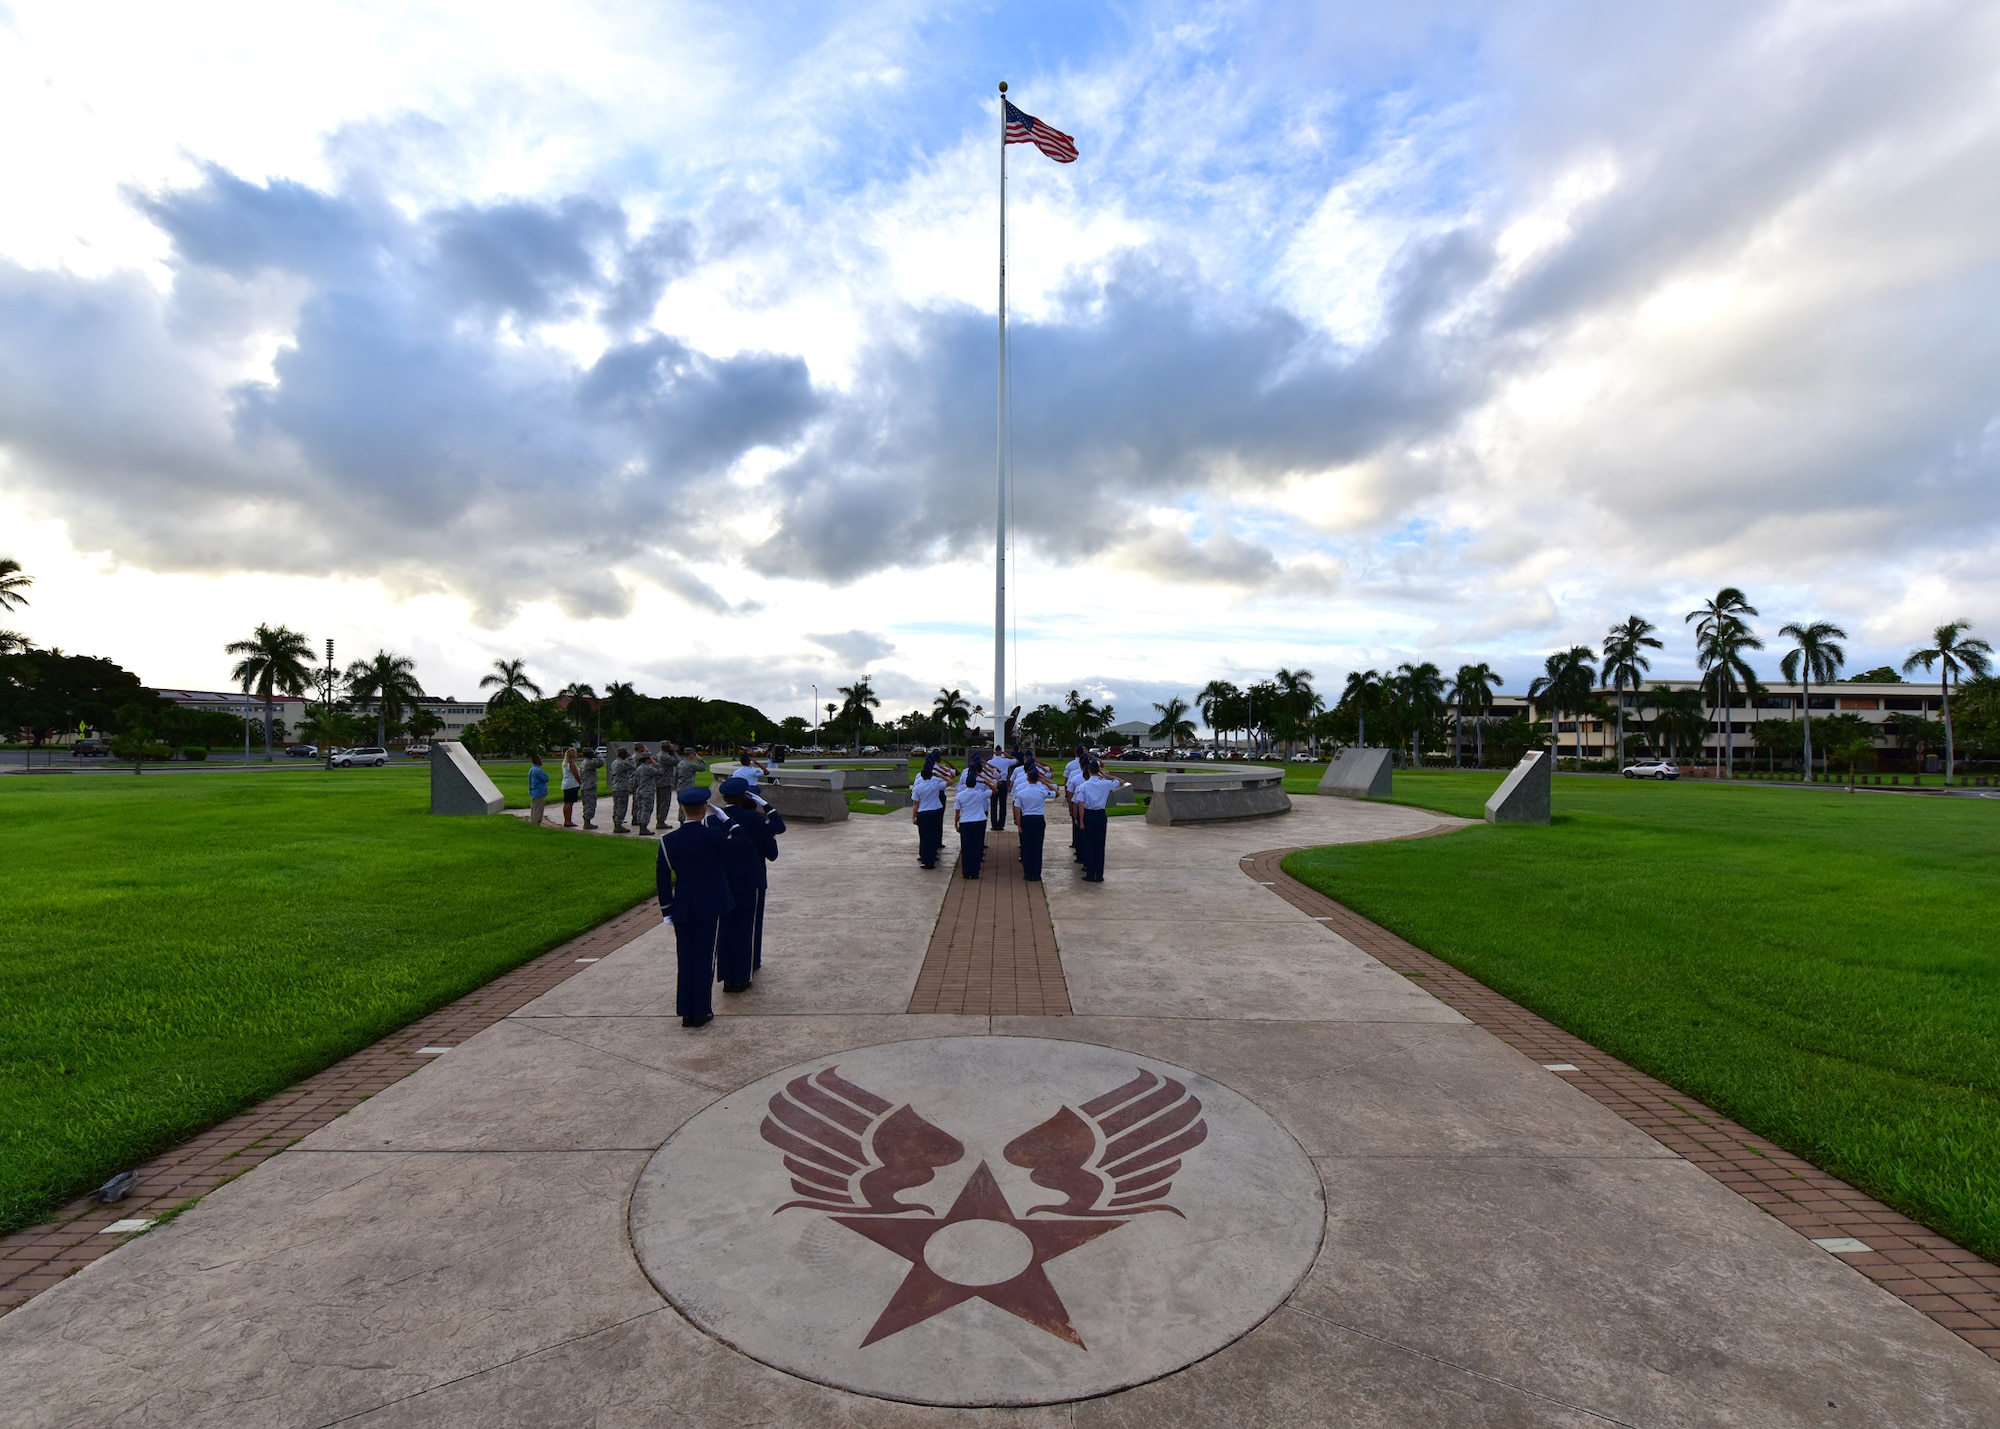 Airmen from the Joint Base Pearl Harbor-Hickam Air Force Sergeant’s Association present arms during a POW/MIA revile ceremony, on JBPHH, Hawaii, Sept. 14, 2015. The ceremony kicks off this year’s POW/MIA week, which honors the 1,627 missing or unaccounted for military members (as of April 2015) in all branches of service. Some of the week’s events will include name readings of those missing or unaccounted for, a remembrance run and a honors and heritage ceremony, held at the Pearl Harbor visitor’s center.  (U.S. Air Force photo by Senior Airman Christopher Stoltz/Released)